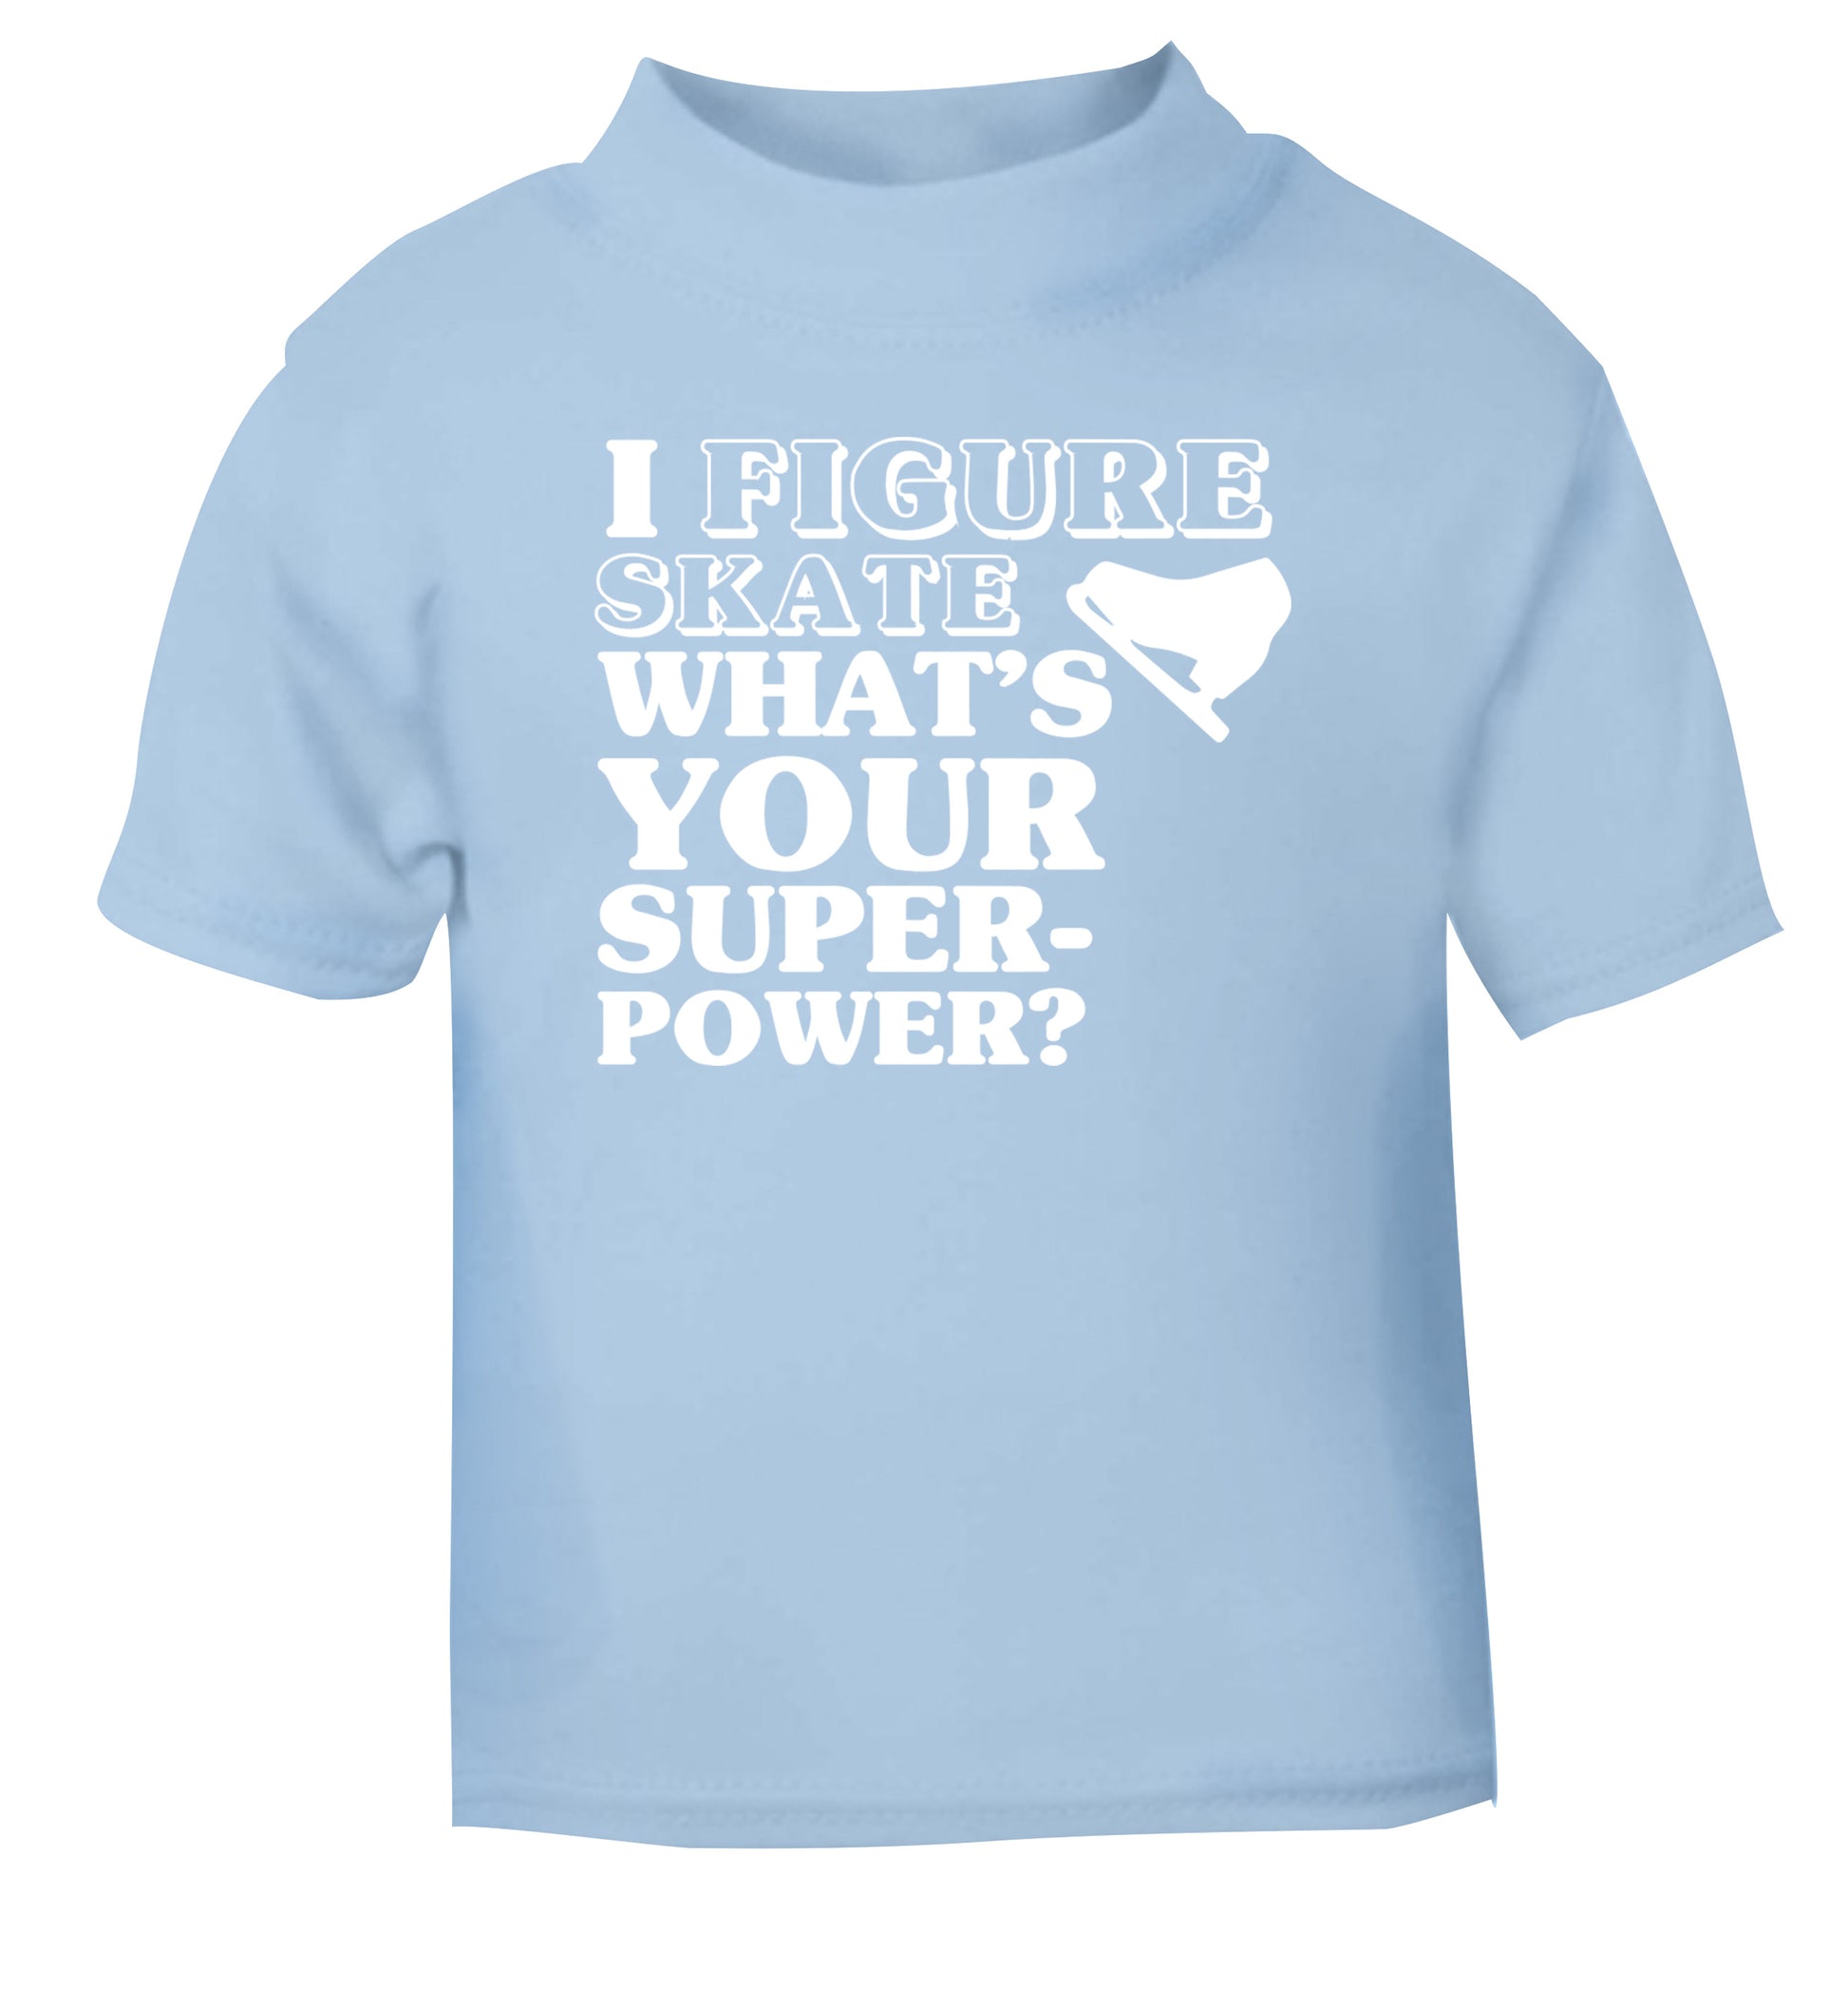 I figure skate what's your superpower? light blue Baby Toddler Tshirt 2 Years